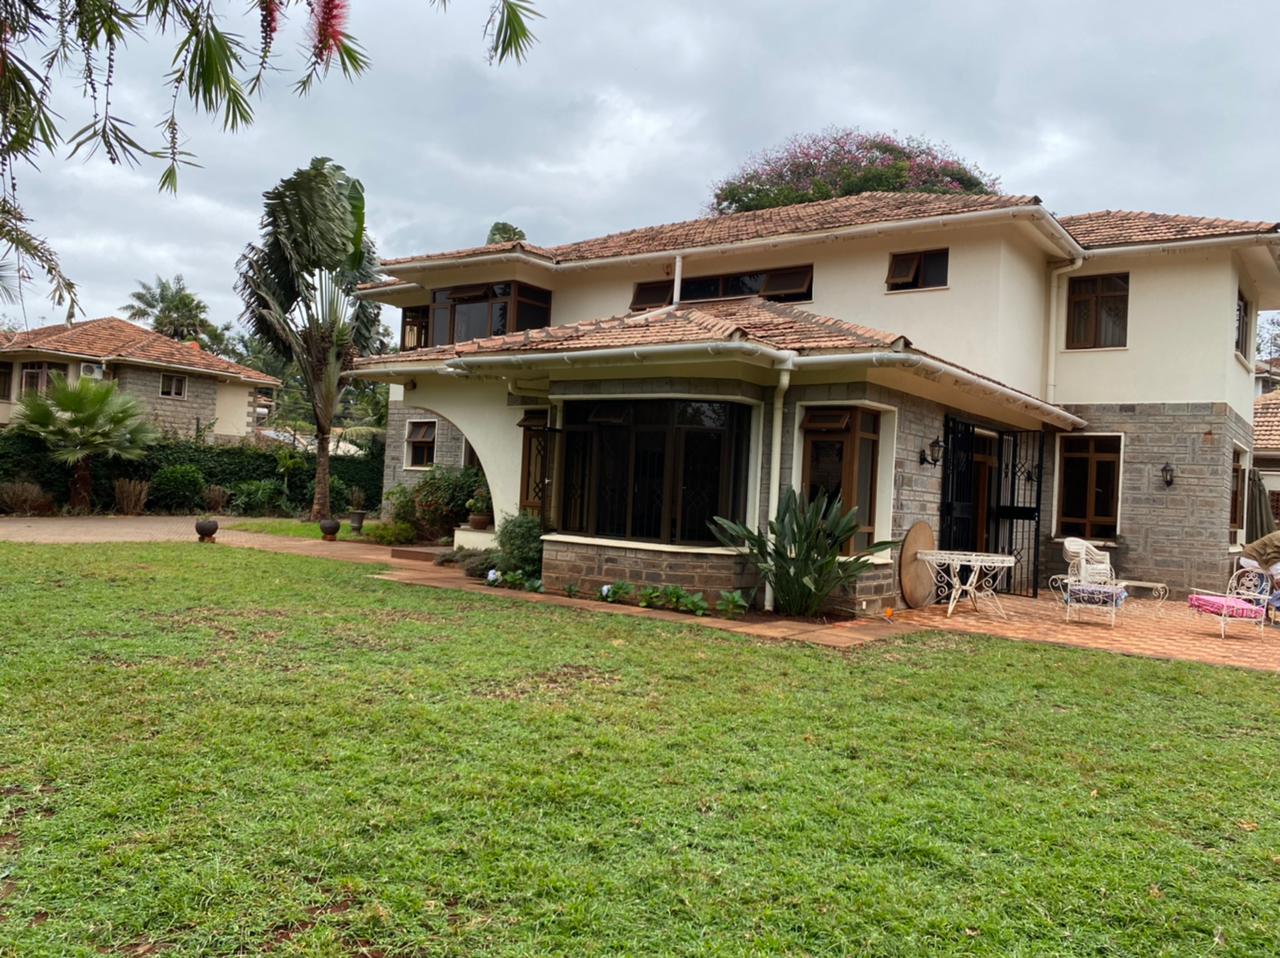 5 Bedrooms Villa all bedrooms en-suite for rent at Ksh400k located in Kitisuru in a gated community but own compound sitting on half acre19